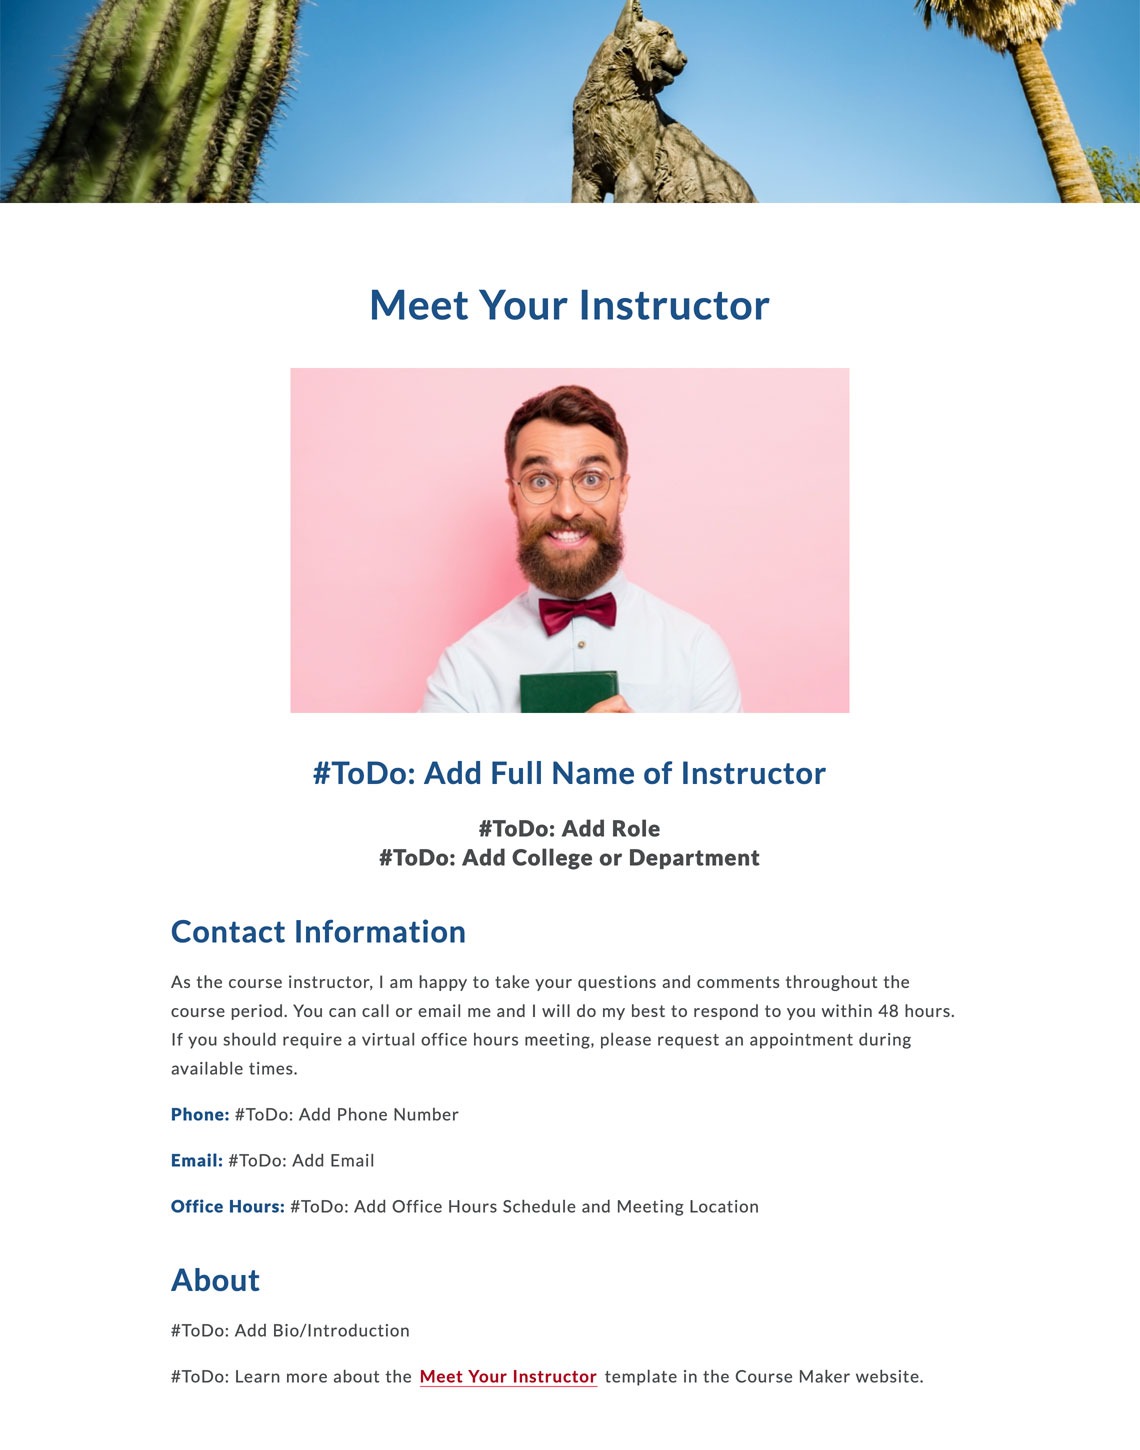 Meet Your Instructor page contains contact information and short bio